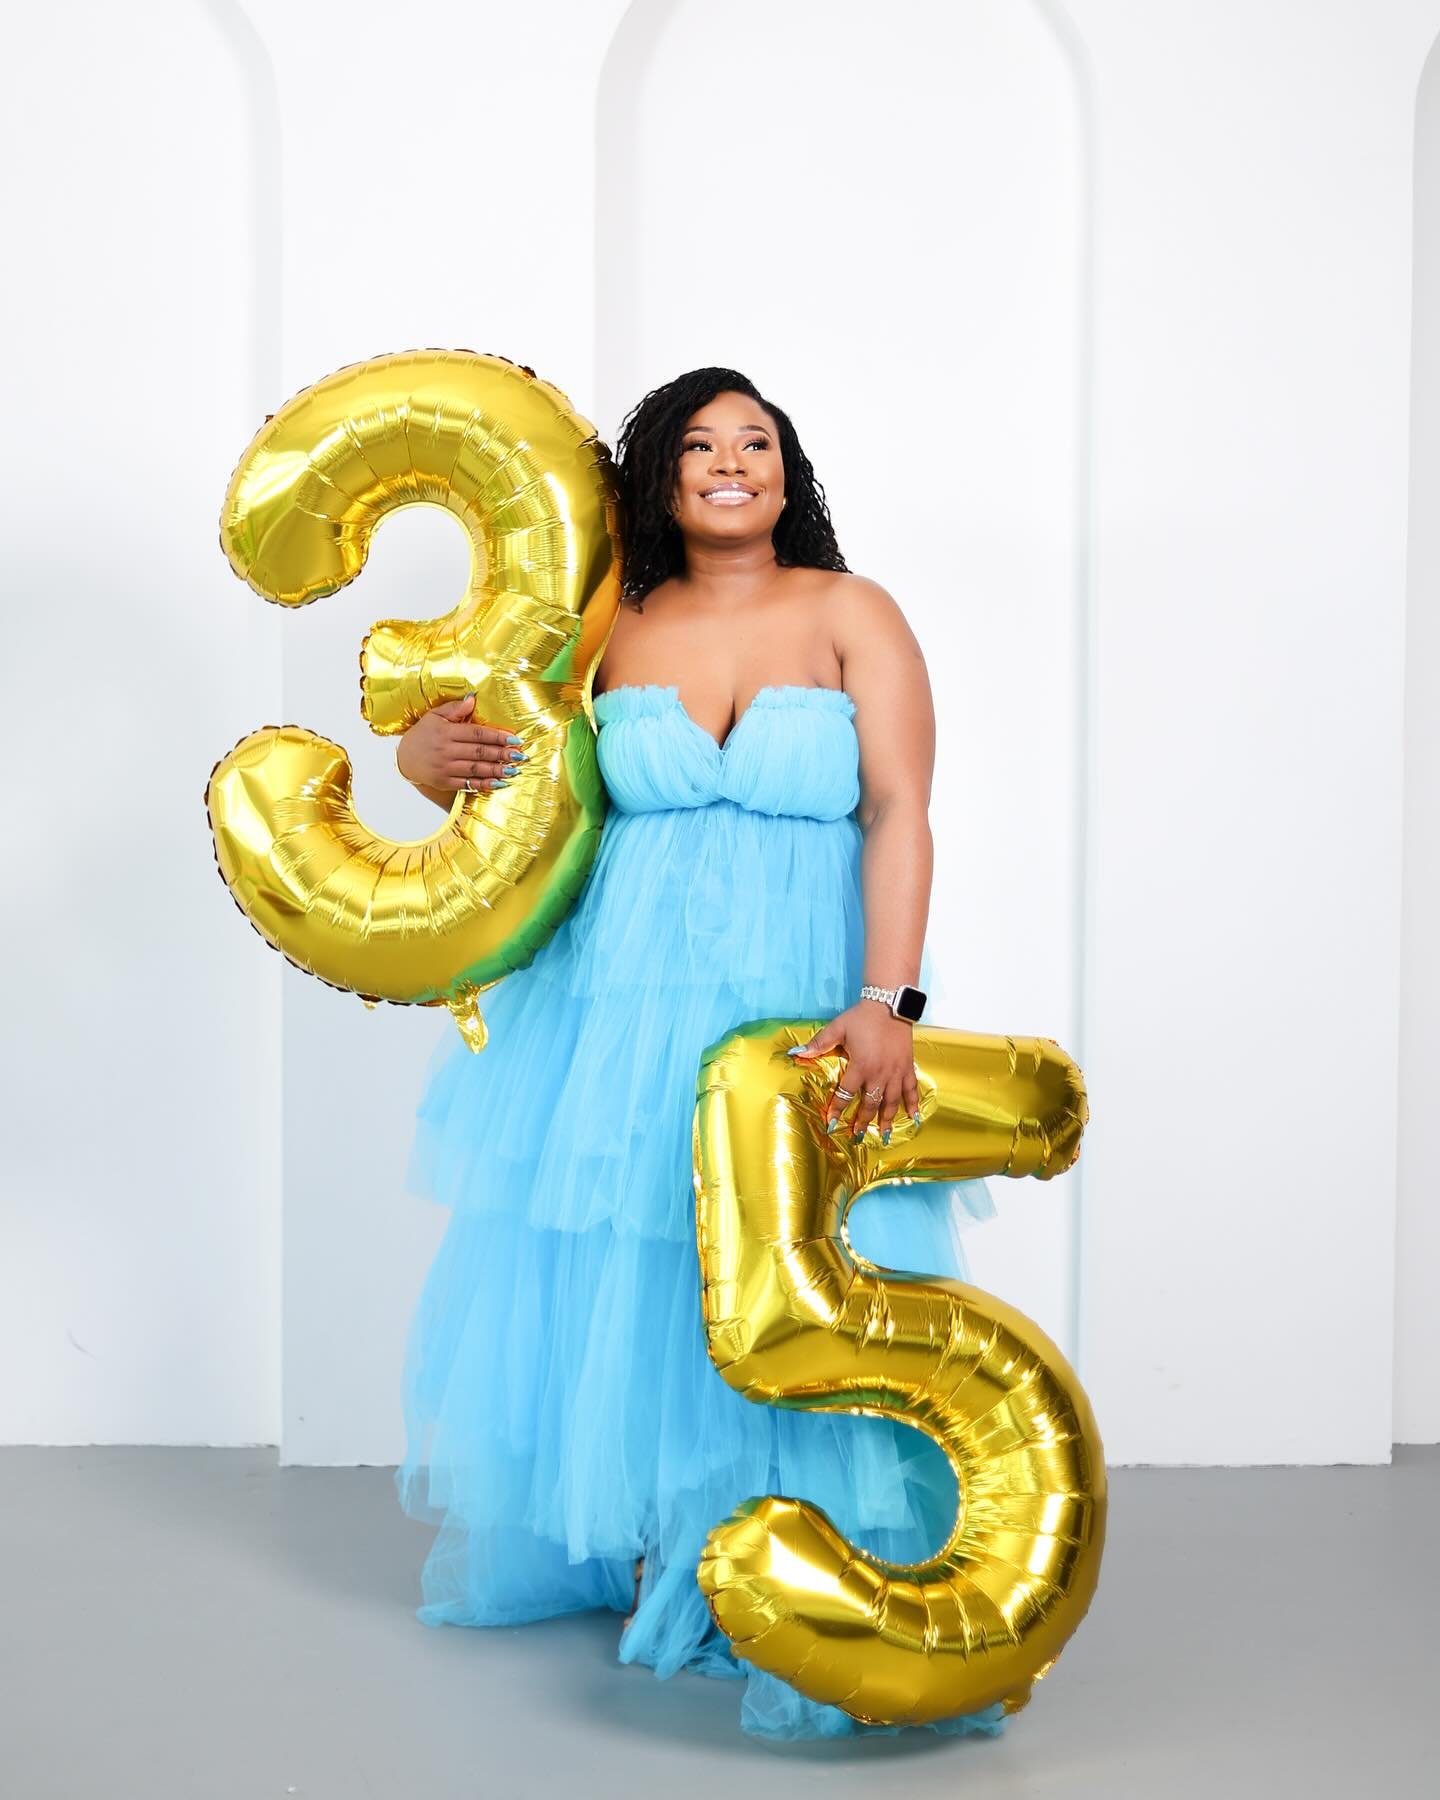 I heard that the 20 somethings are saying that you lose relevance once you hit 35, well let me set the record straight&hellip;..your 30s will ALWAYS be better than your 20s.

Because in your 30s you&rsquo;ll be a lot
🤩Wiser
🤩Self-confident
🤩Sure a